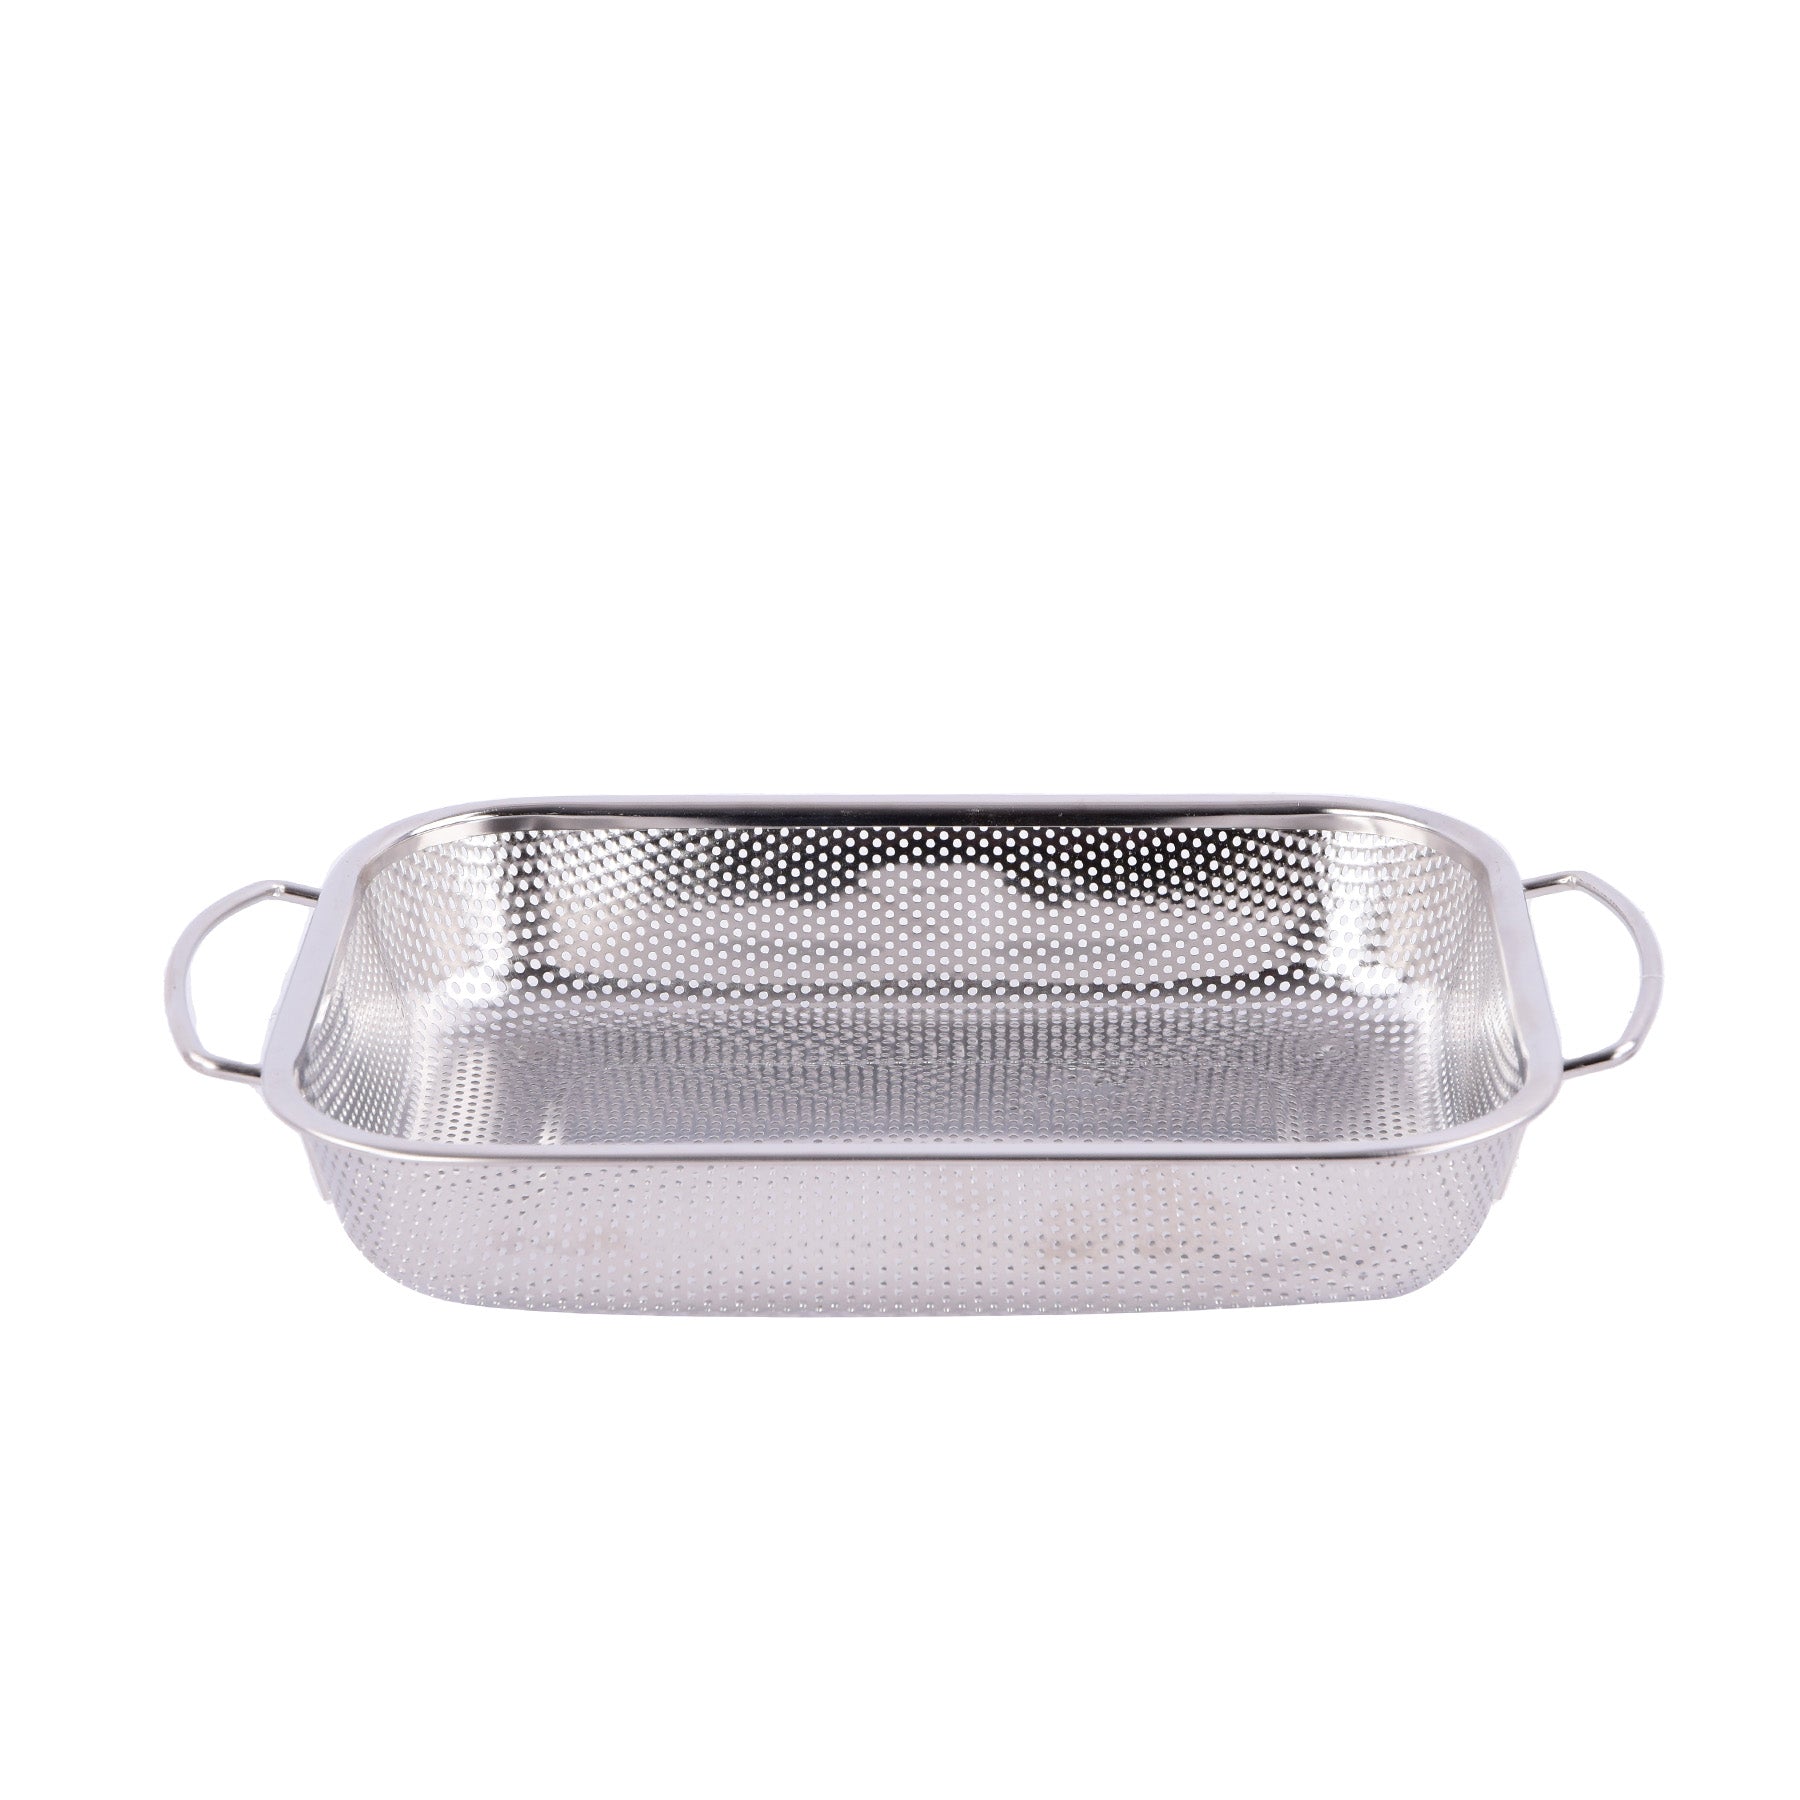 Rectangular Strainer with handles - Silver